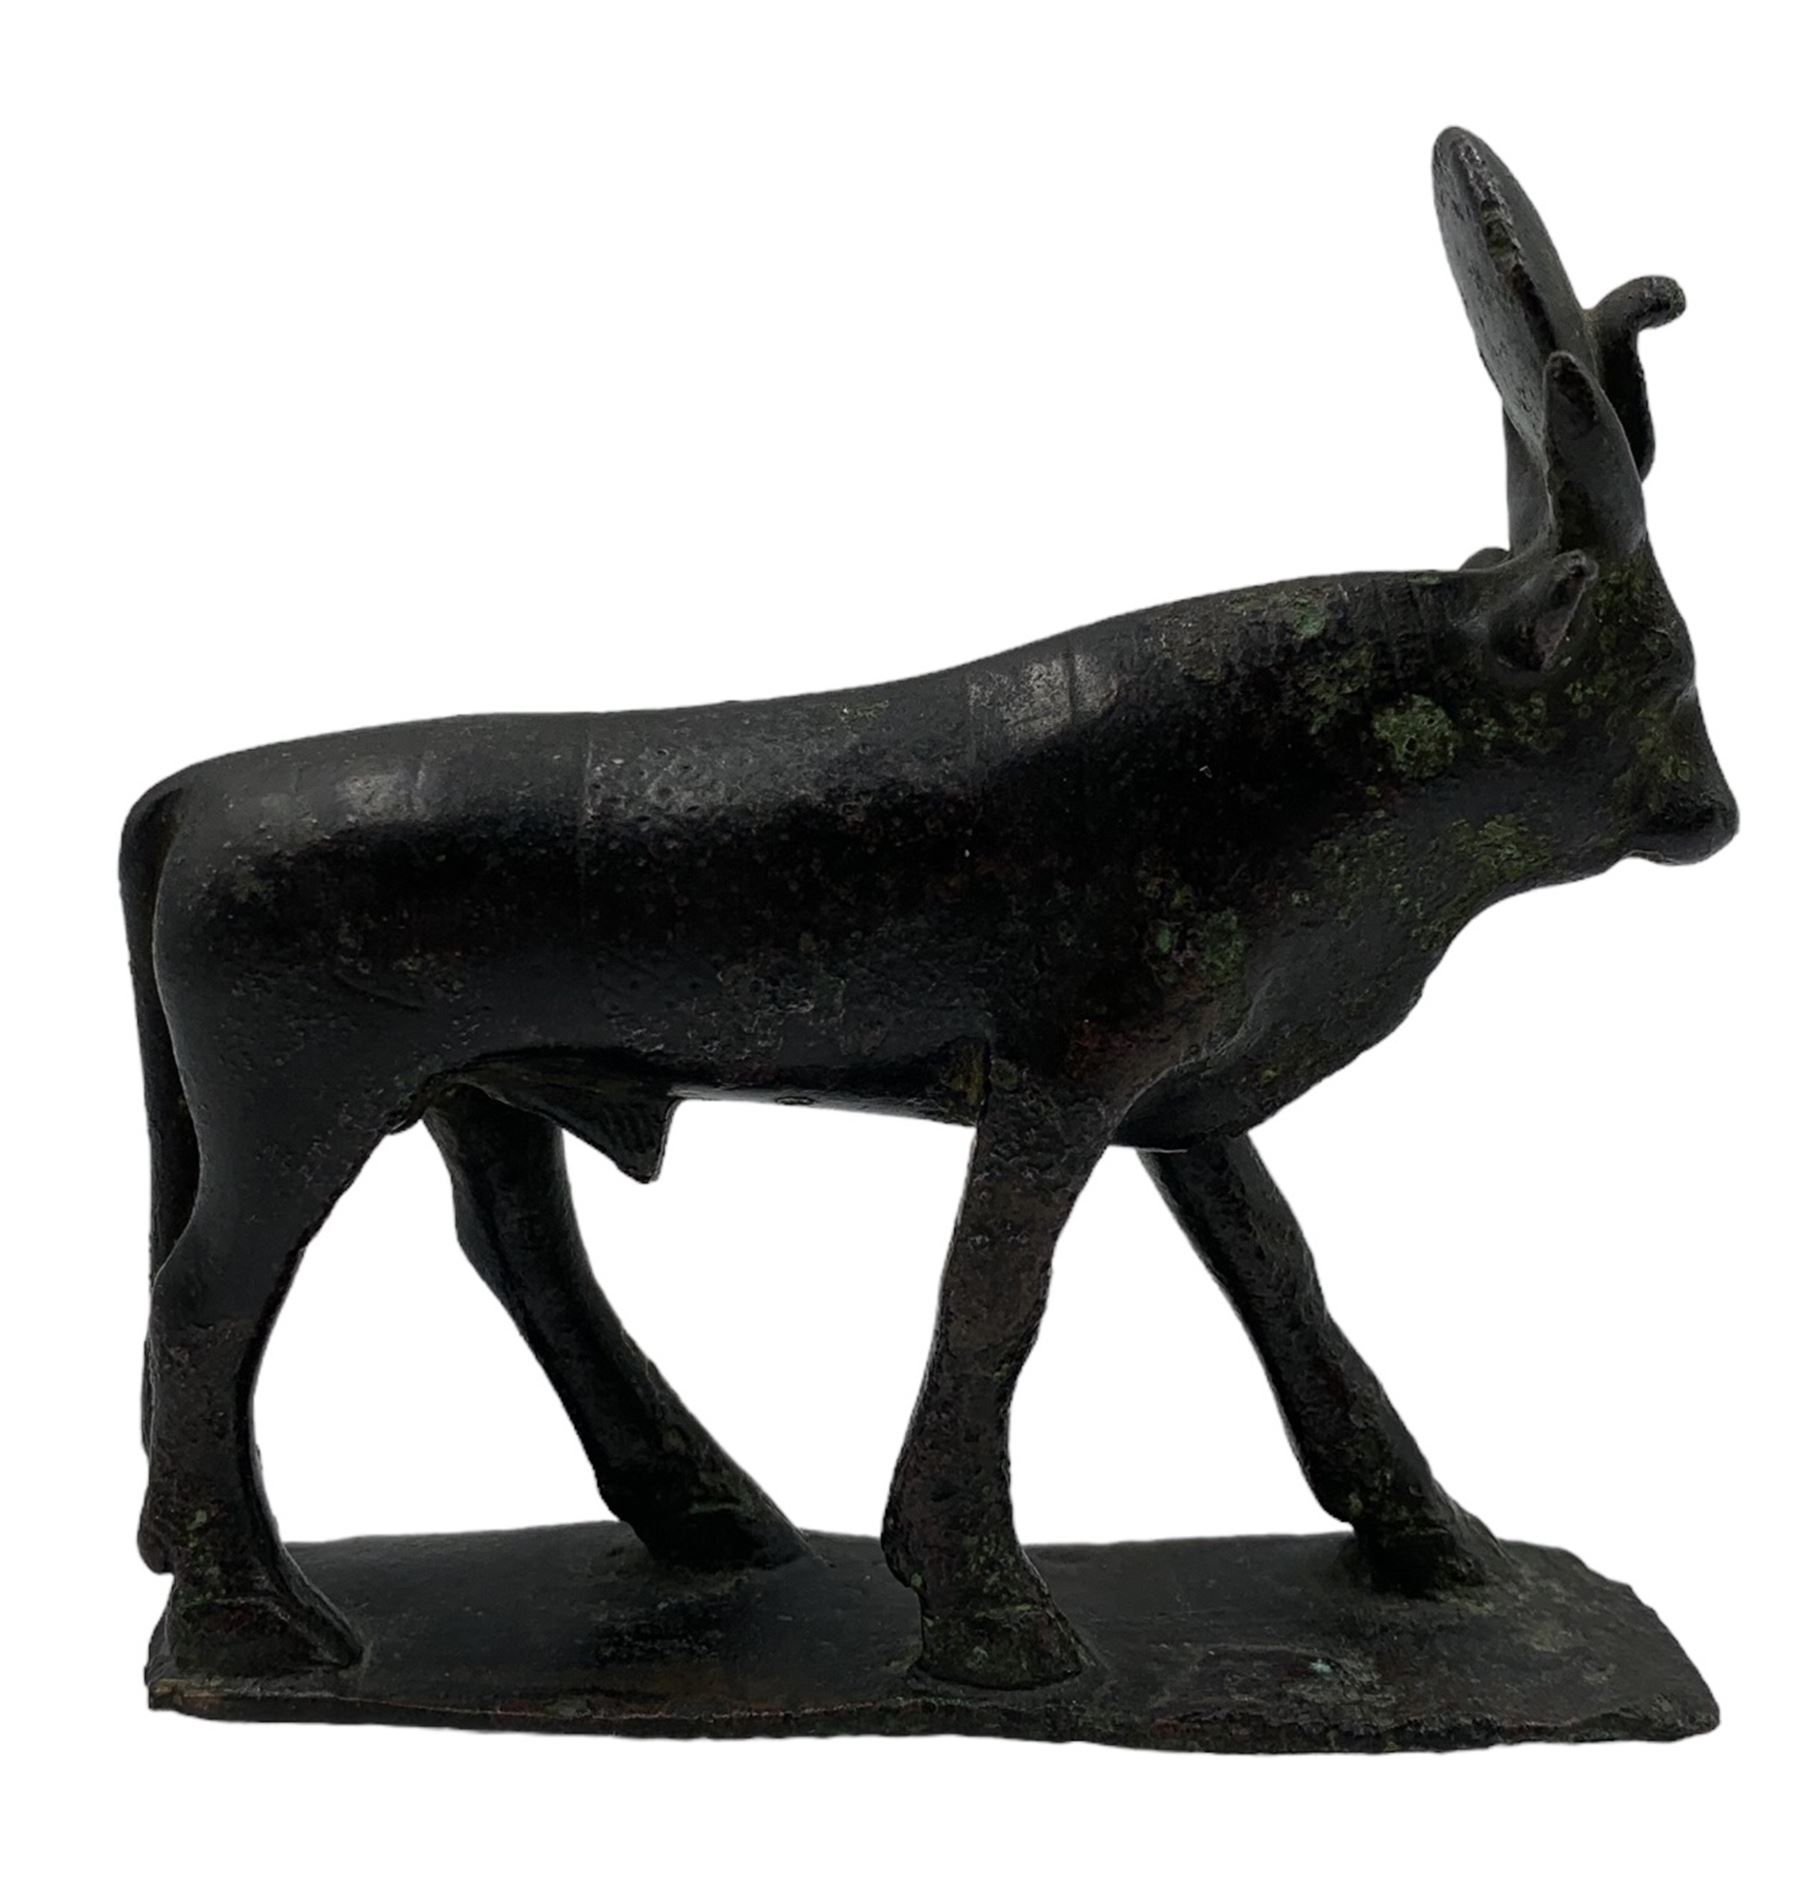 Ptolemeic period Egyptian bronze Apis Bull - Image 3 of 7